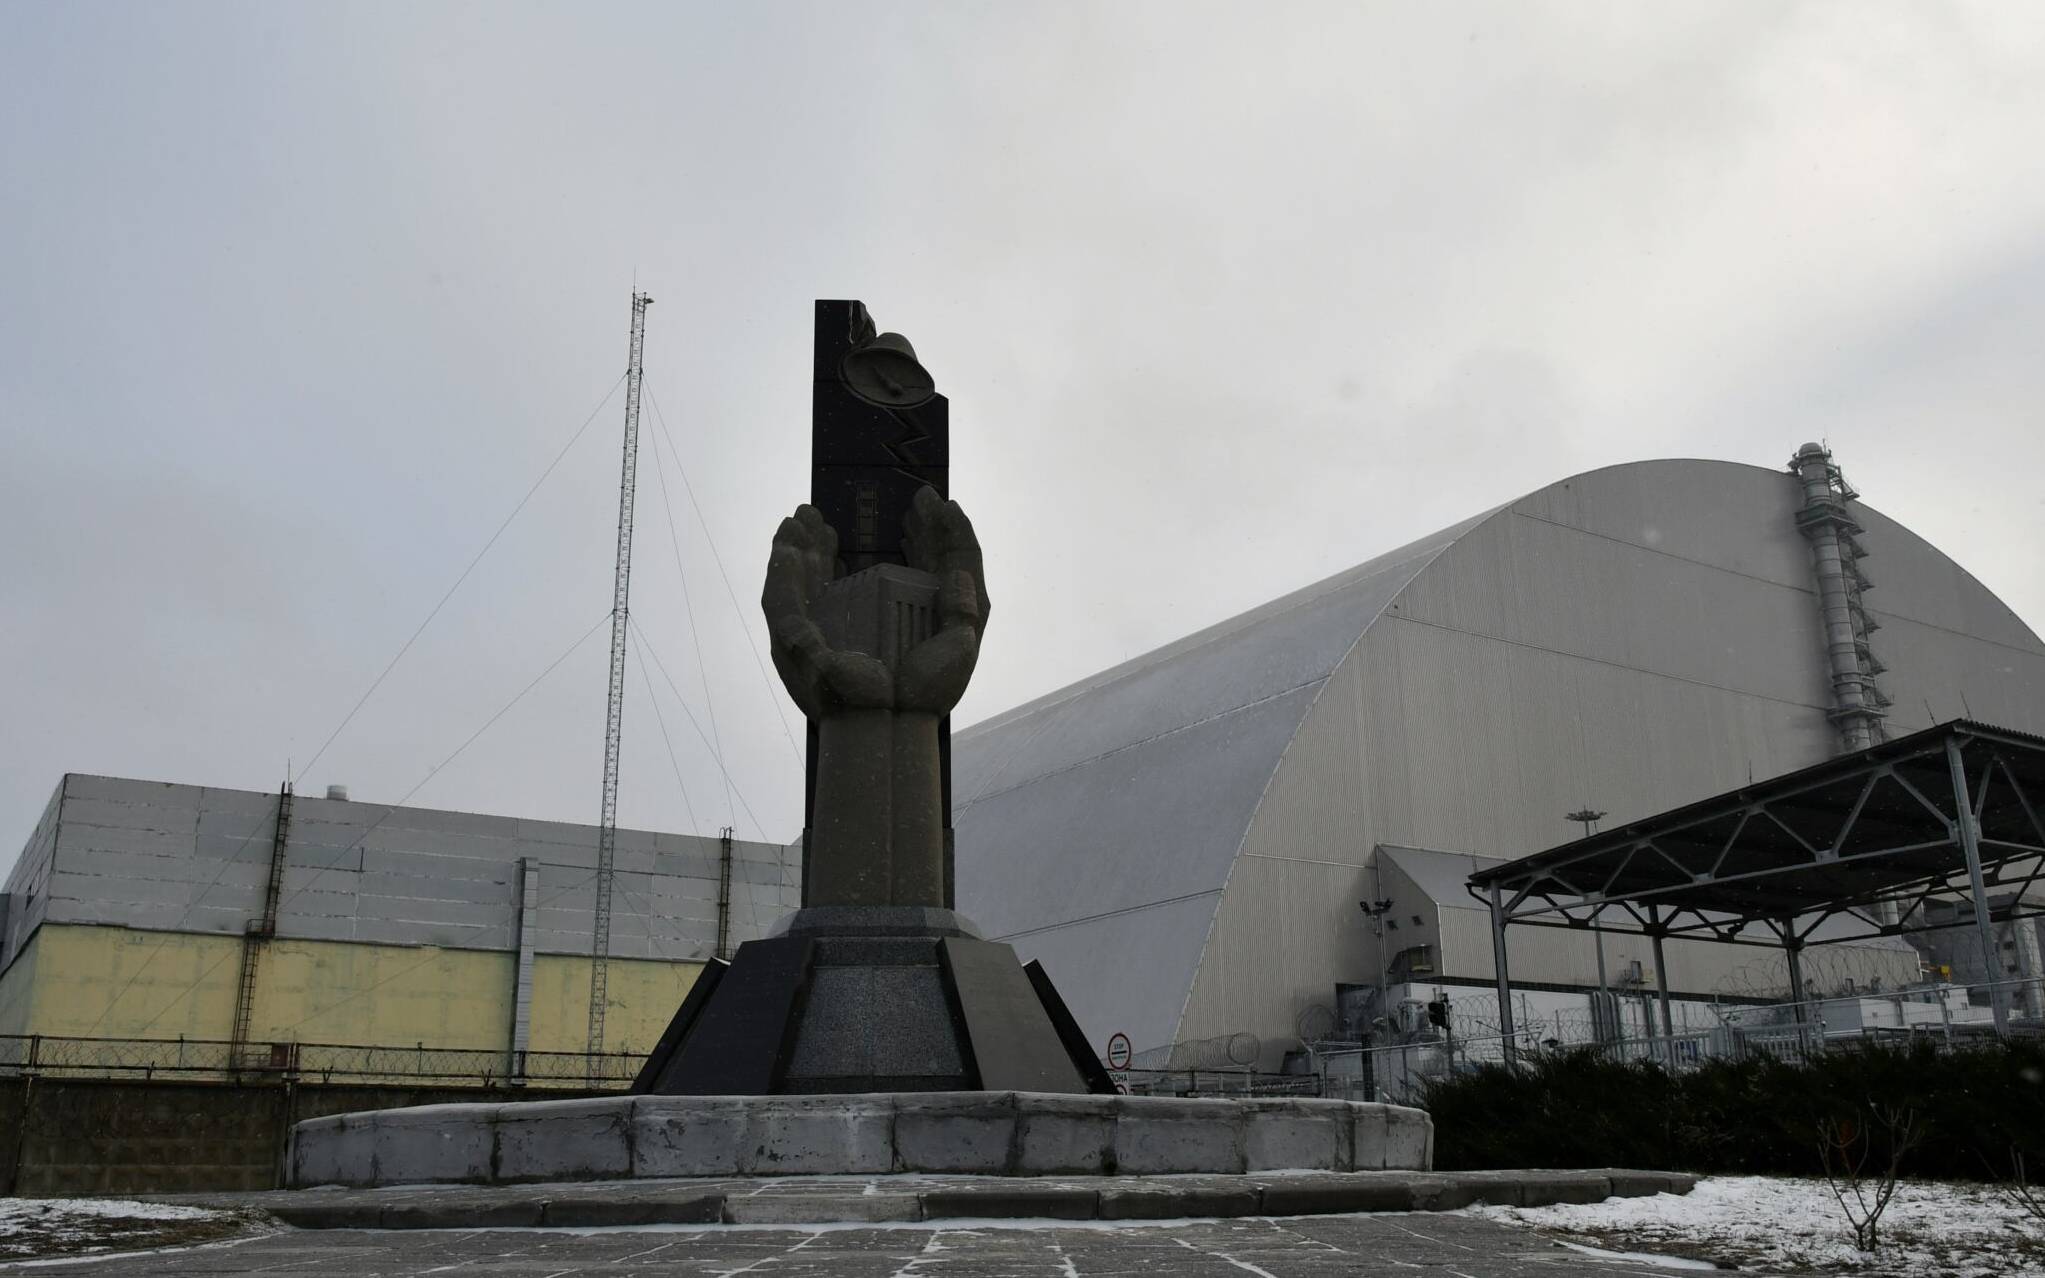 (FILES) This file photograph taken on December 8, 2020 shows a monument in front of the giant protective dome built over the sarcophagus of the destroyed fourth reactor of Chernobyl nuclear power plant. - Ukraine announced on February 24 that Russian forces had captured the Chernobyl nuclear power plant after a "fierce" battle on the first day of the Kremlin's invasion of its ex-Soviet neighbour. "After the absolutely senseless attack of the Russians in this direction, it is impossible to say that the Chernobyl nuclear power plant is safe. This is one of the most serious threats to Europe today," said Mykhailo Podolyak, advisor to the chief of the presidential administration. (Photo by GENYA SAVILOV / AFP)